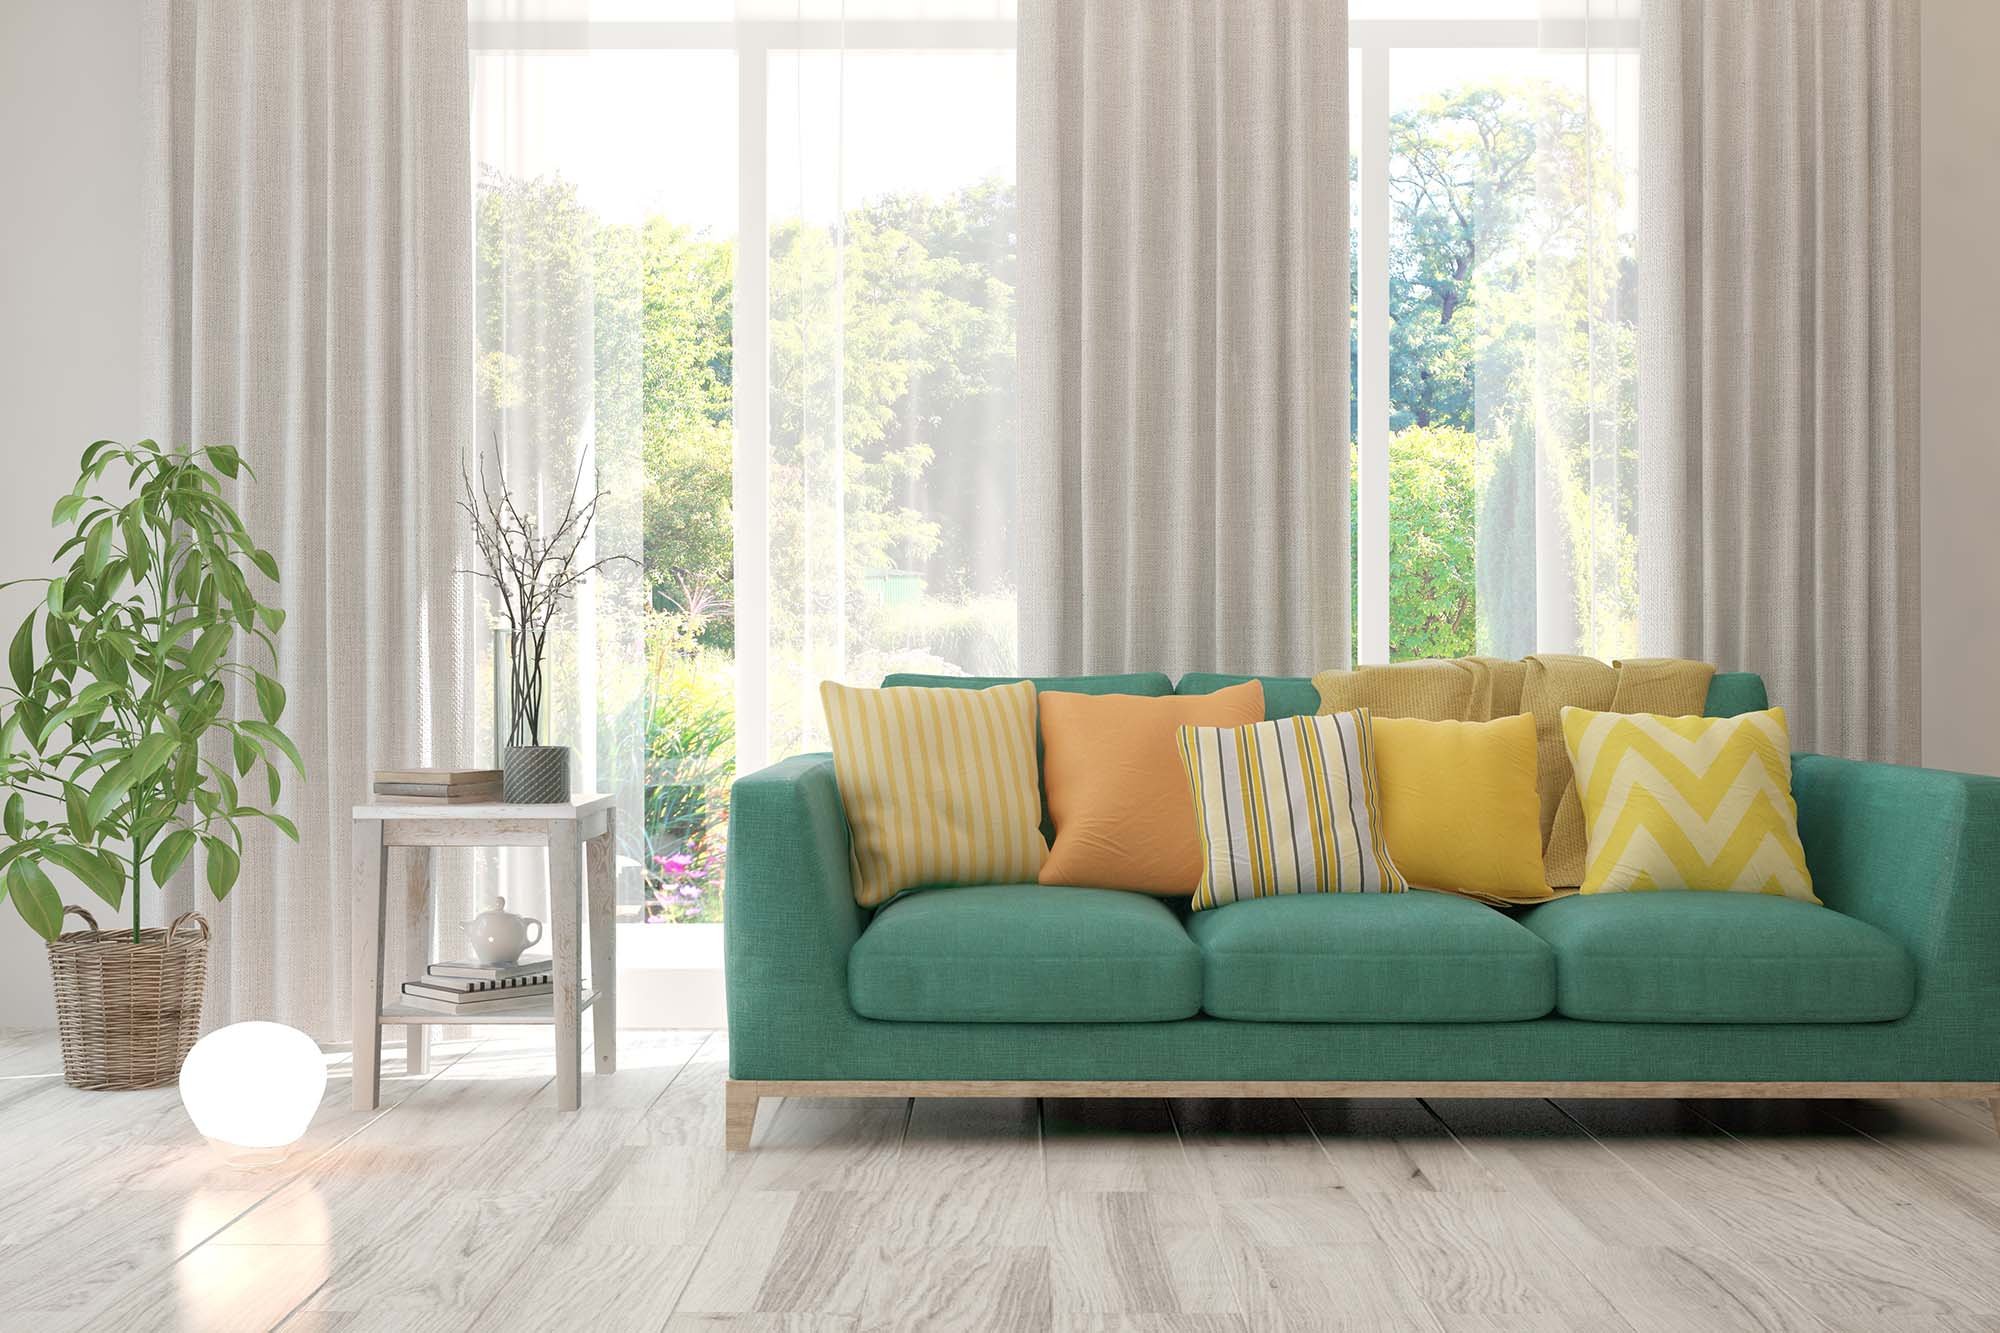 Learn whether the species matter in hardwood flooring with Apollo Flooring in Tucson, AZ area